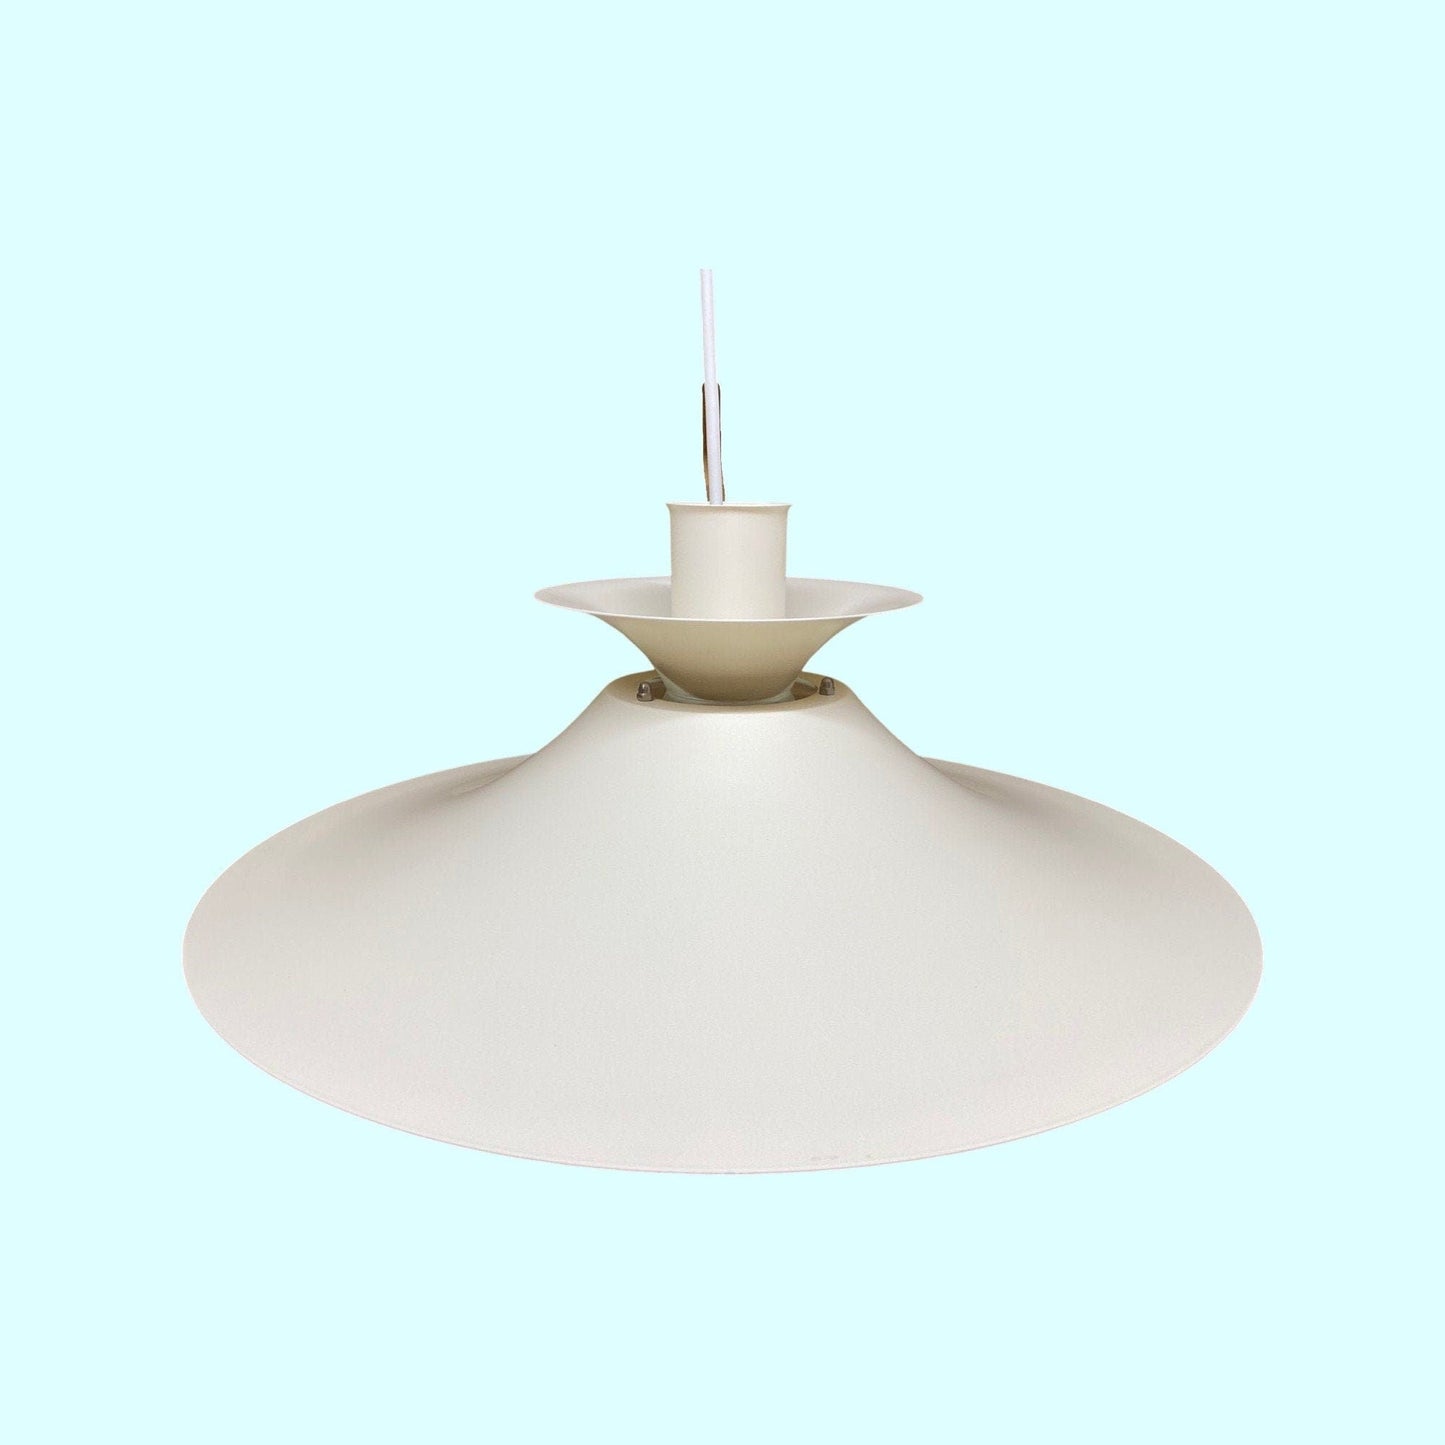 60s RARE Danish Design Pendant Lamp | Produced by 'Horn Belysning' | Vintage White Colored Scandinavian Modern Lighting From The Mid-Century - FancyVintage.nl -